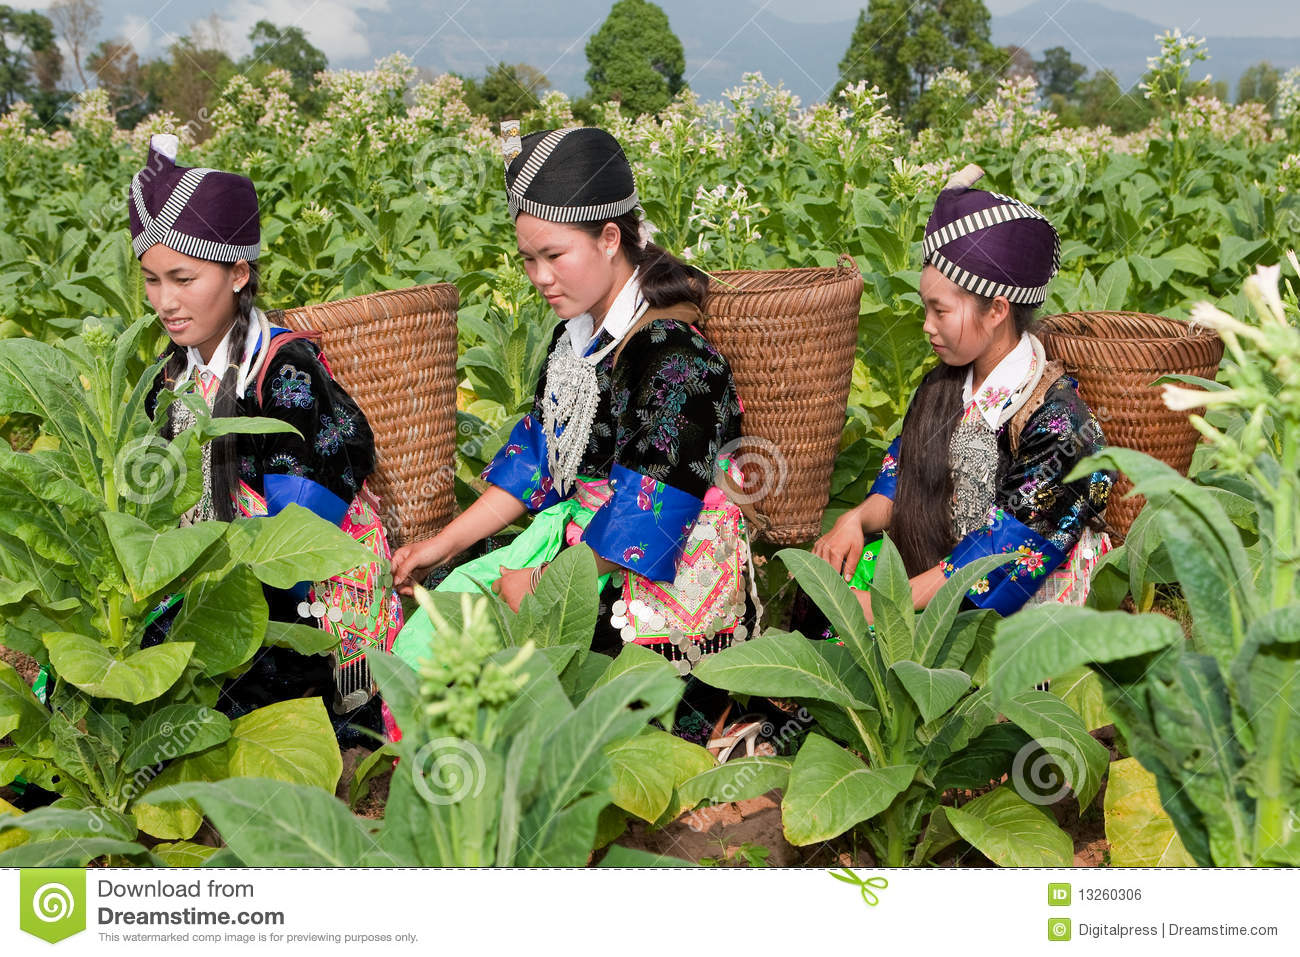 Application for the License to trade in tobacco ingredients in Vietnam